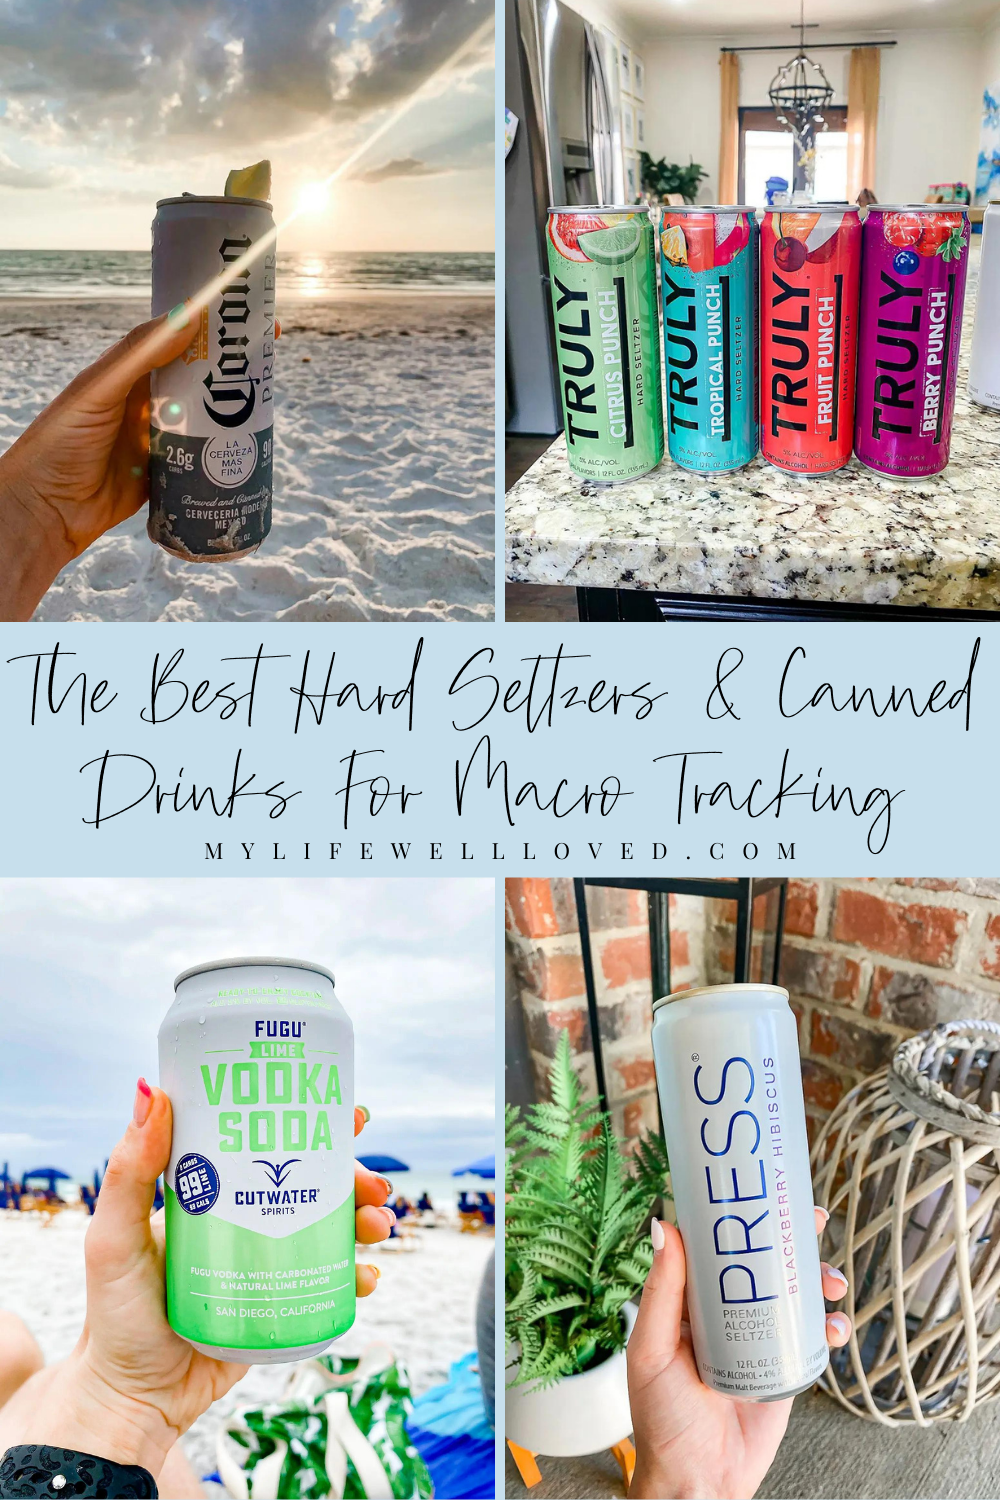 Healthy lifestyle blogger, My Life Well Loved, shares the best hard seltzer cocktails for macro tracking! Click NOW to see her full list!